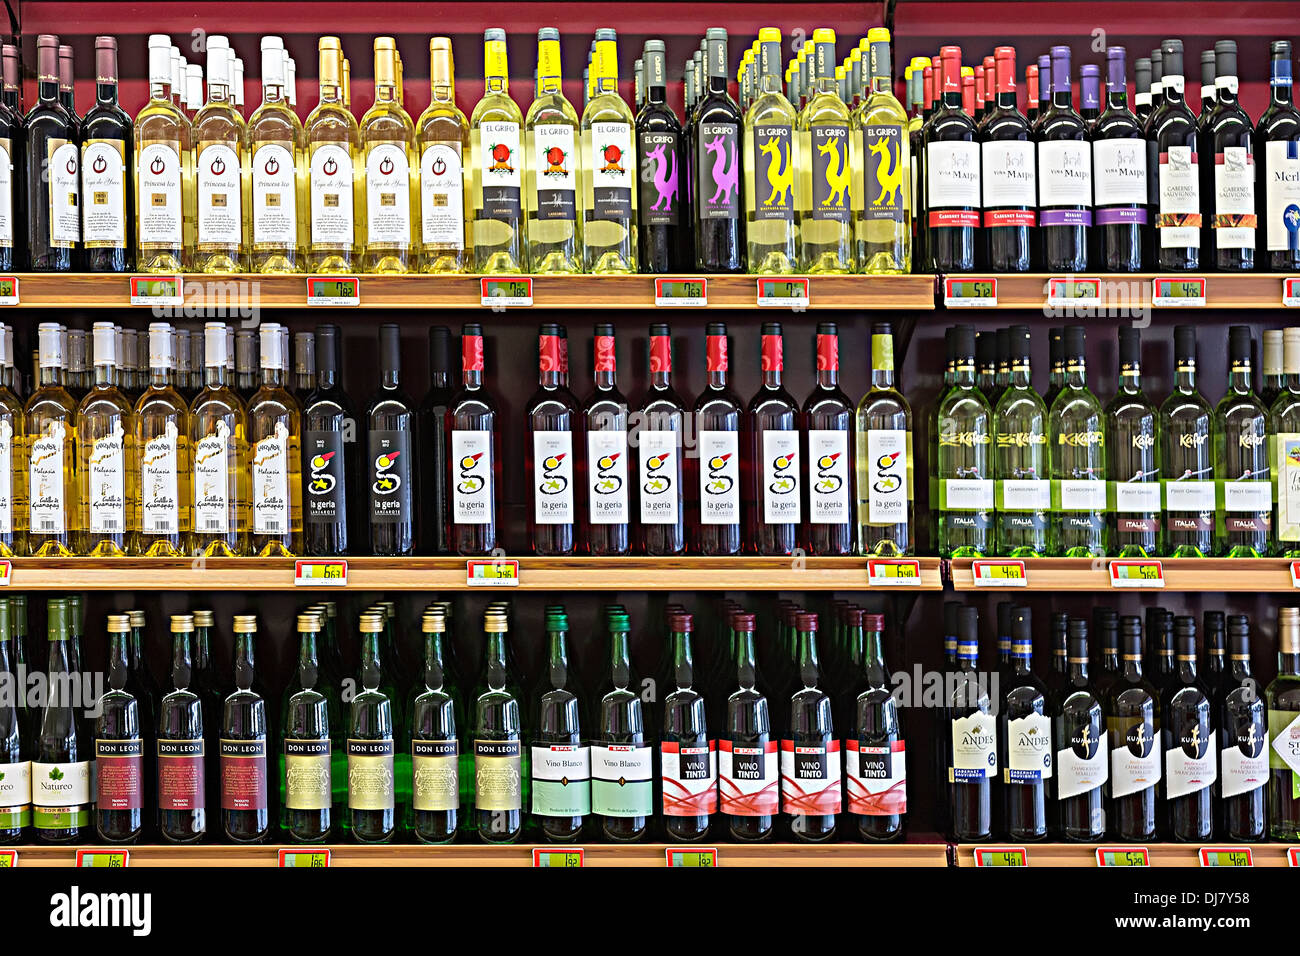 Bottles of local wine on sale in shop, Costa Teguise, Lanzarote, Canary Islands, Spain Stock Photo